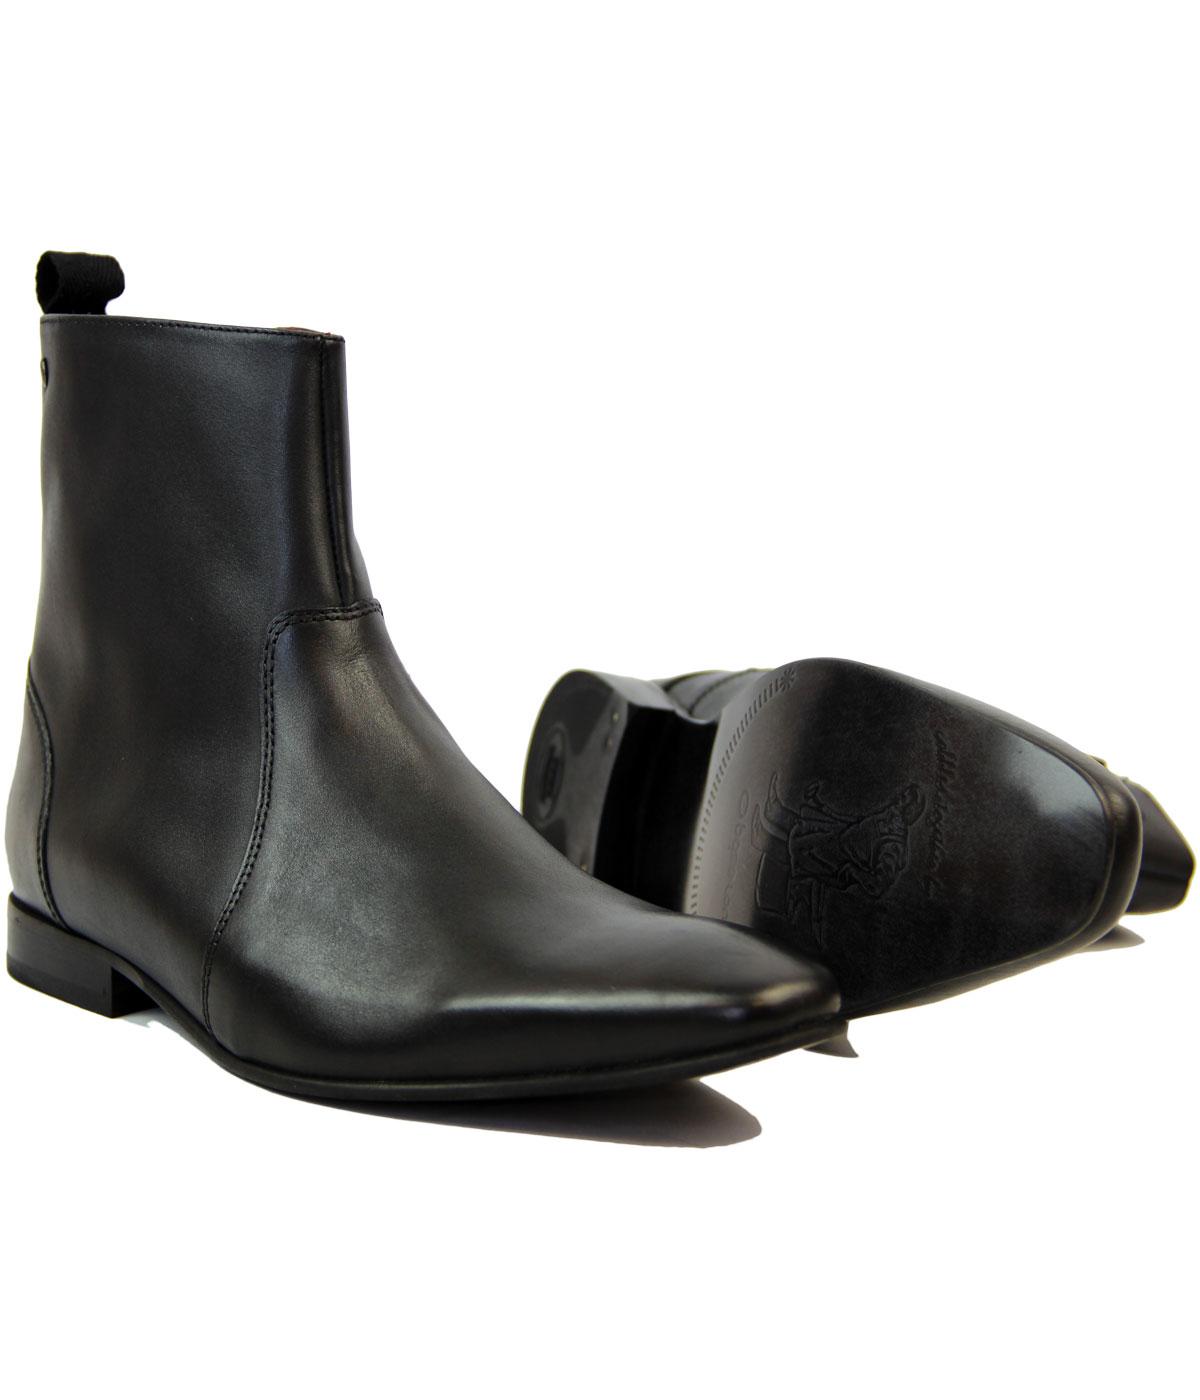 1960s chelsea boots